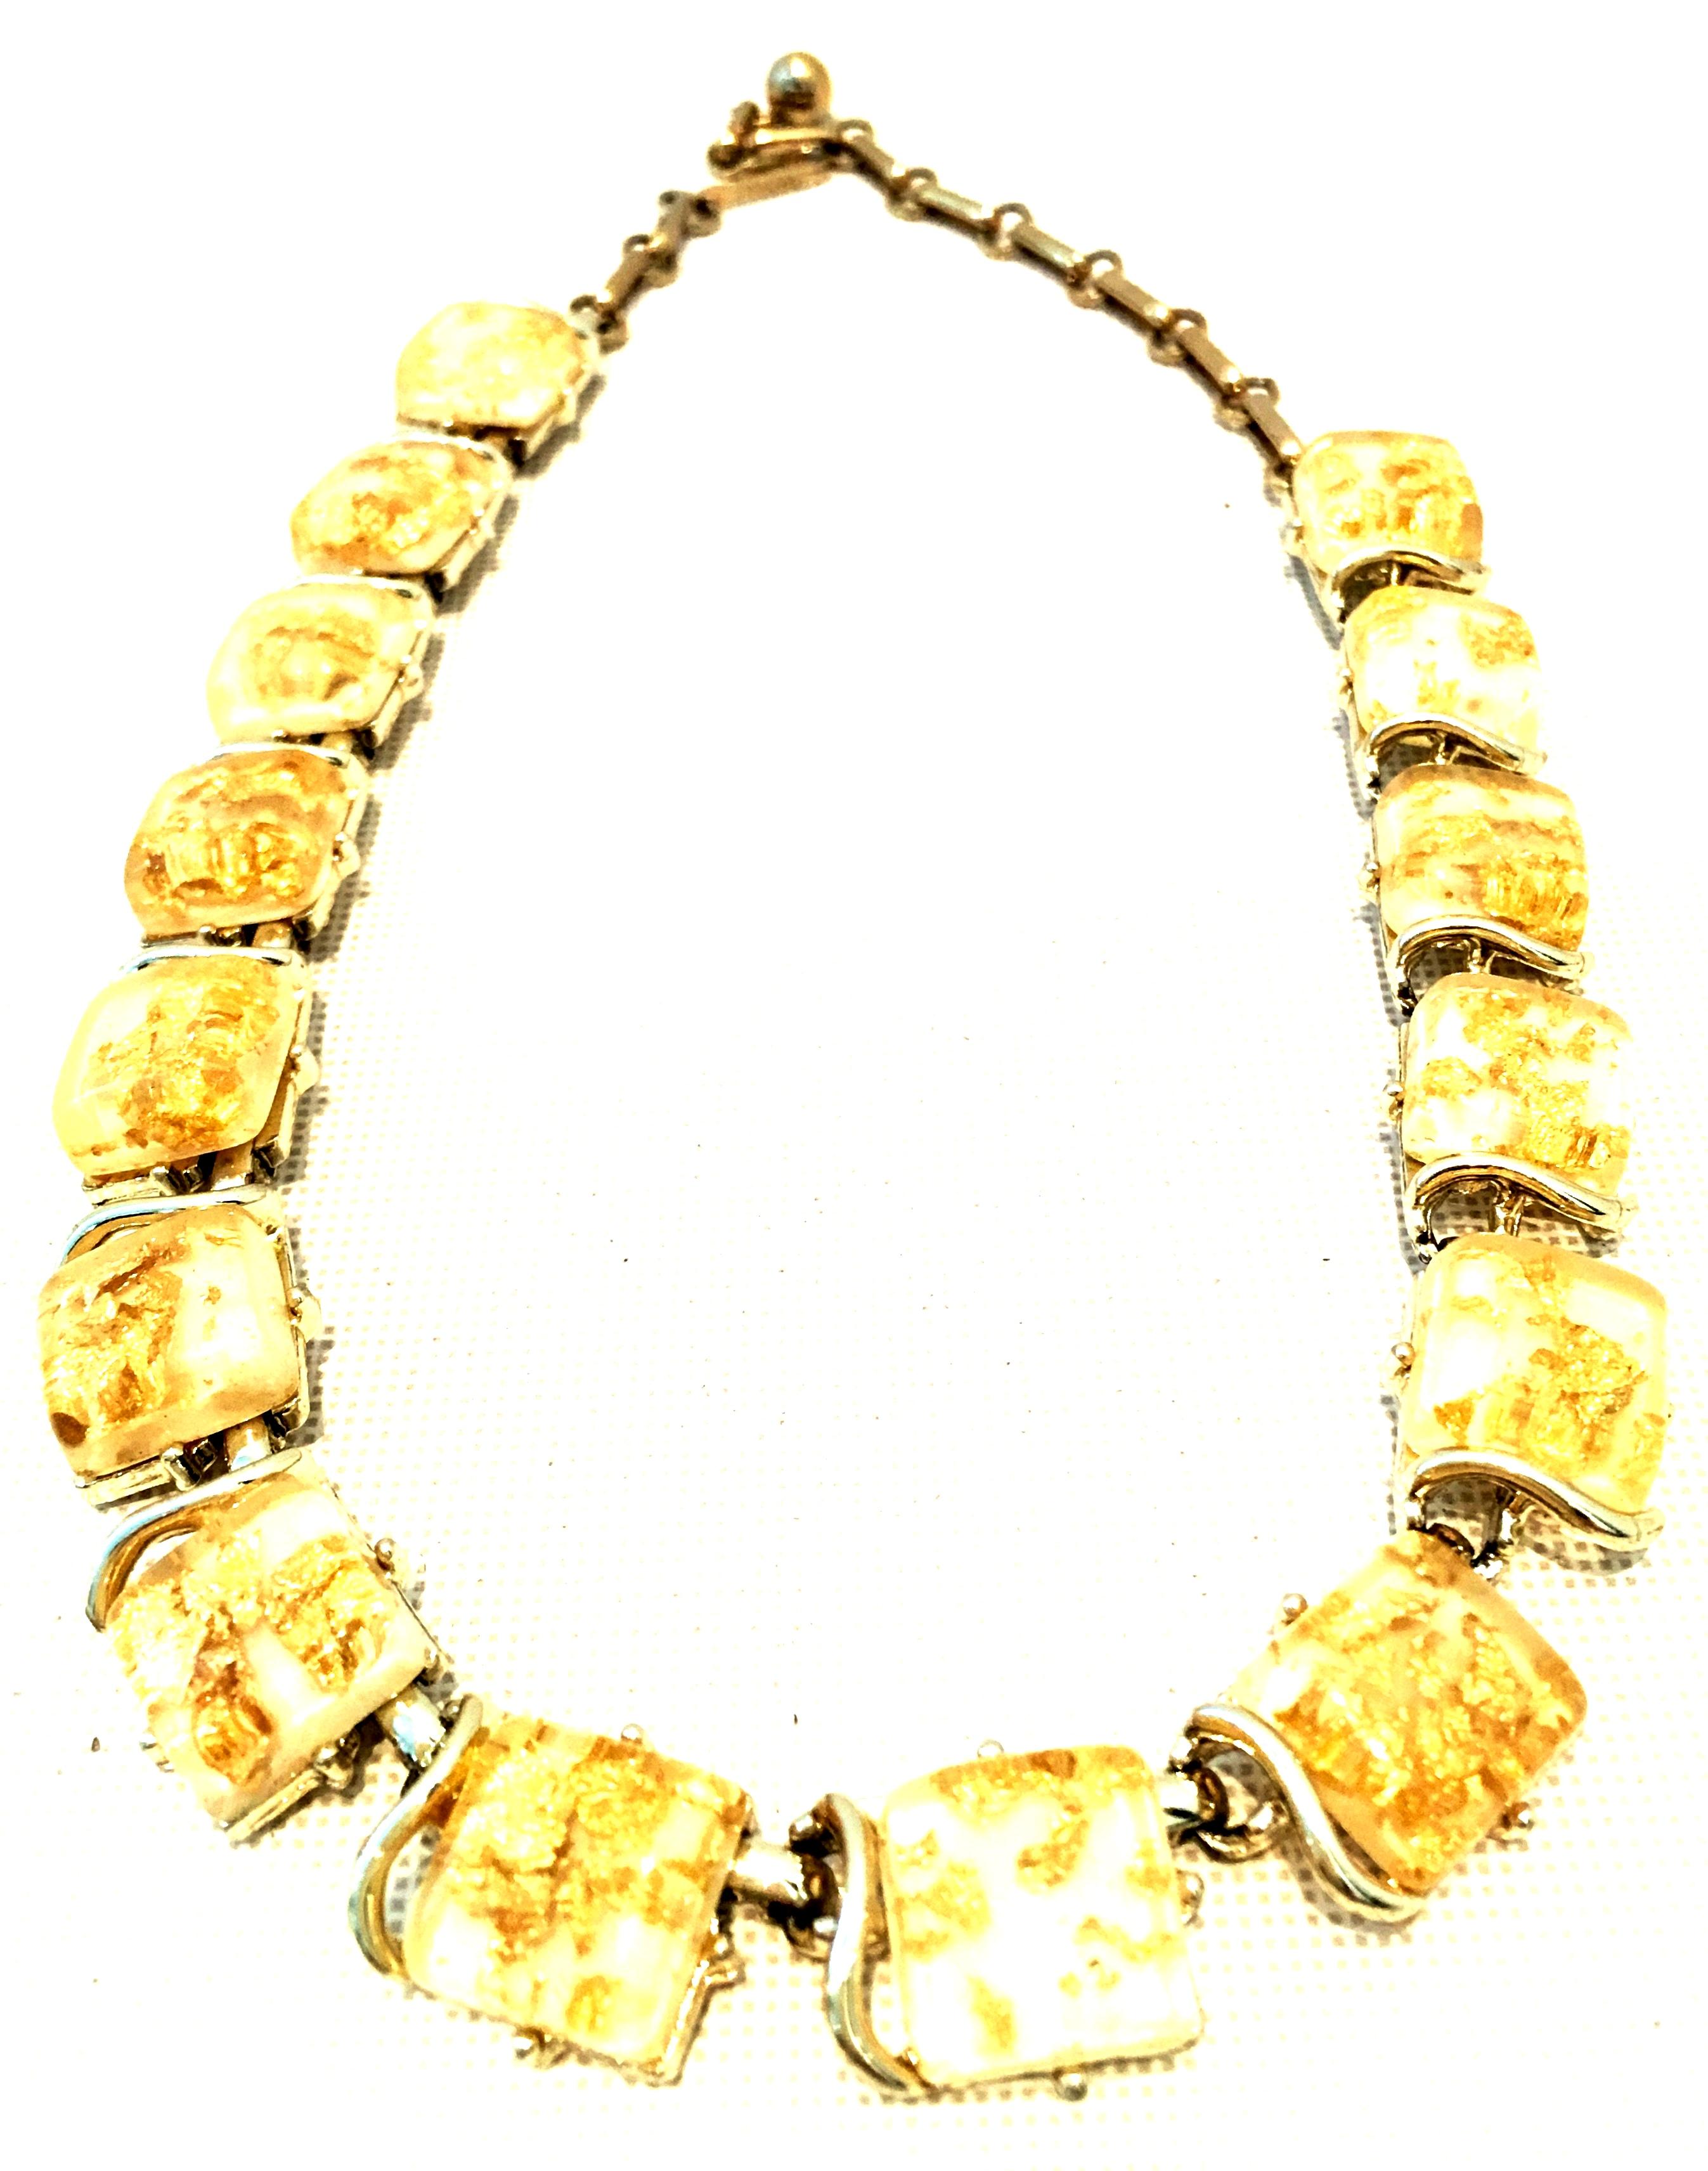 Mid-20th Century Gold Plate & 22K Gold Fleck Confetti Lucite Choker Style Necklace & Link Bracelet By, Coro S/2. This finely crafted and highly coveted demi-parure of two pieces includes a link style choker necklace and link style bracelet. each